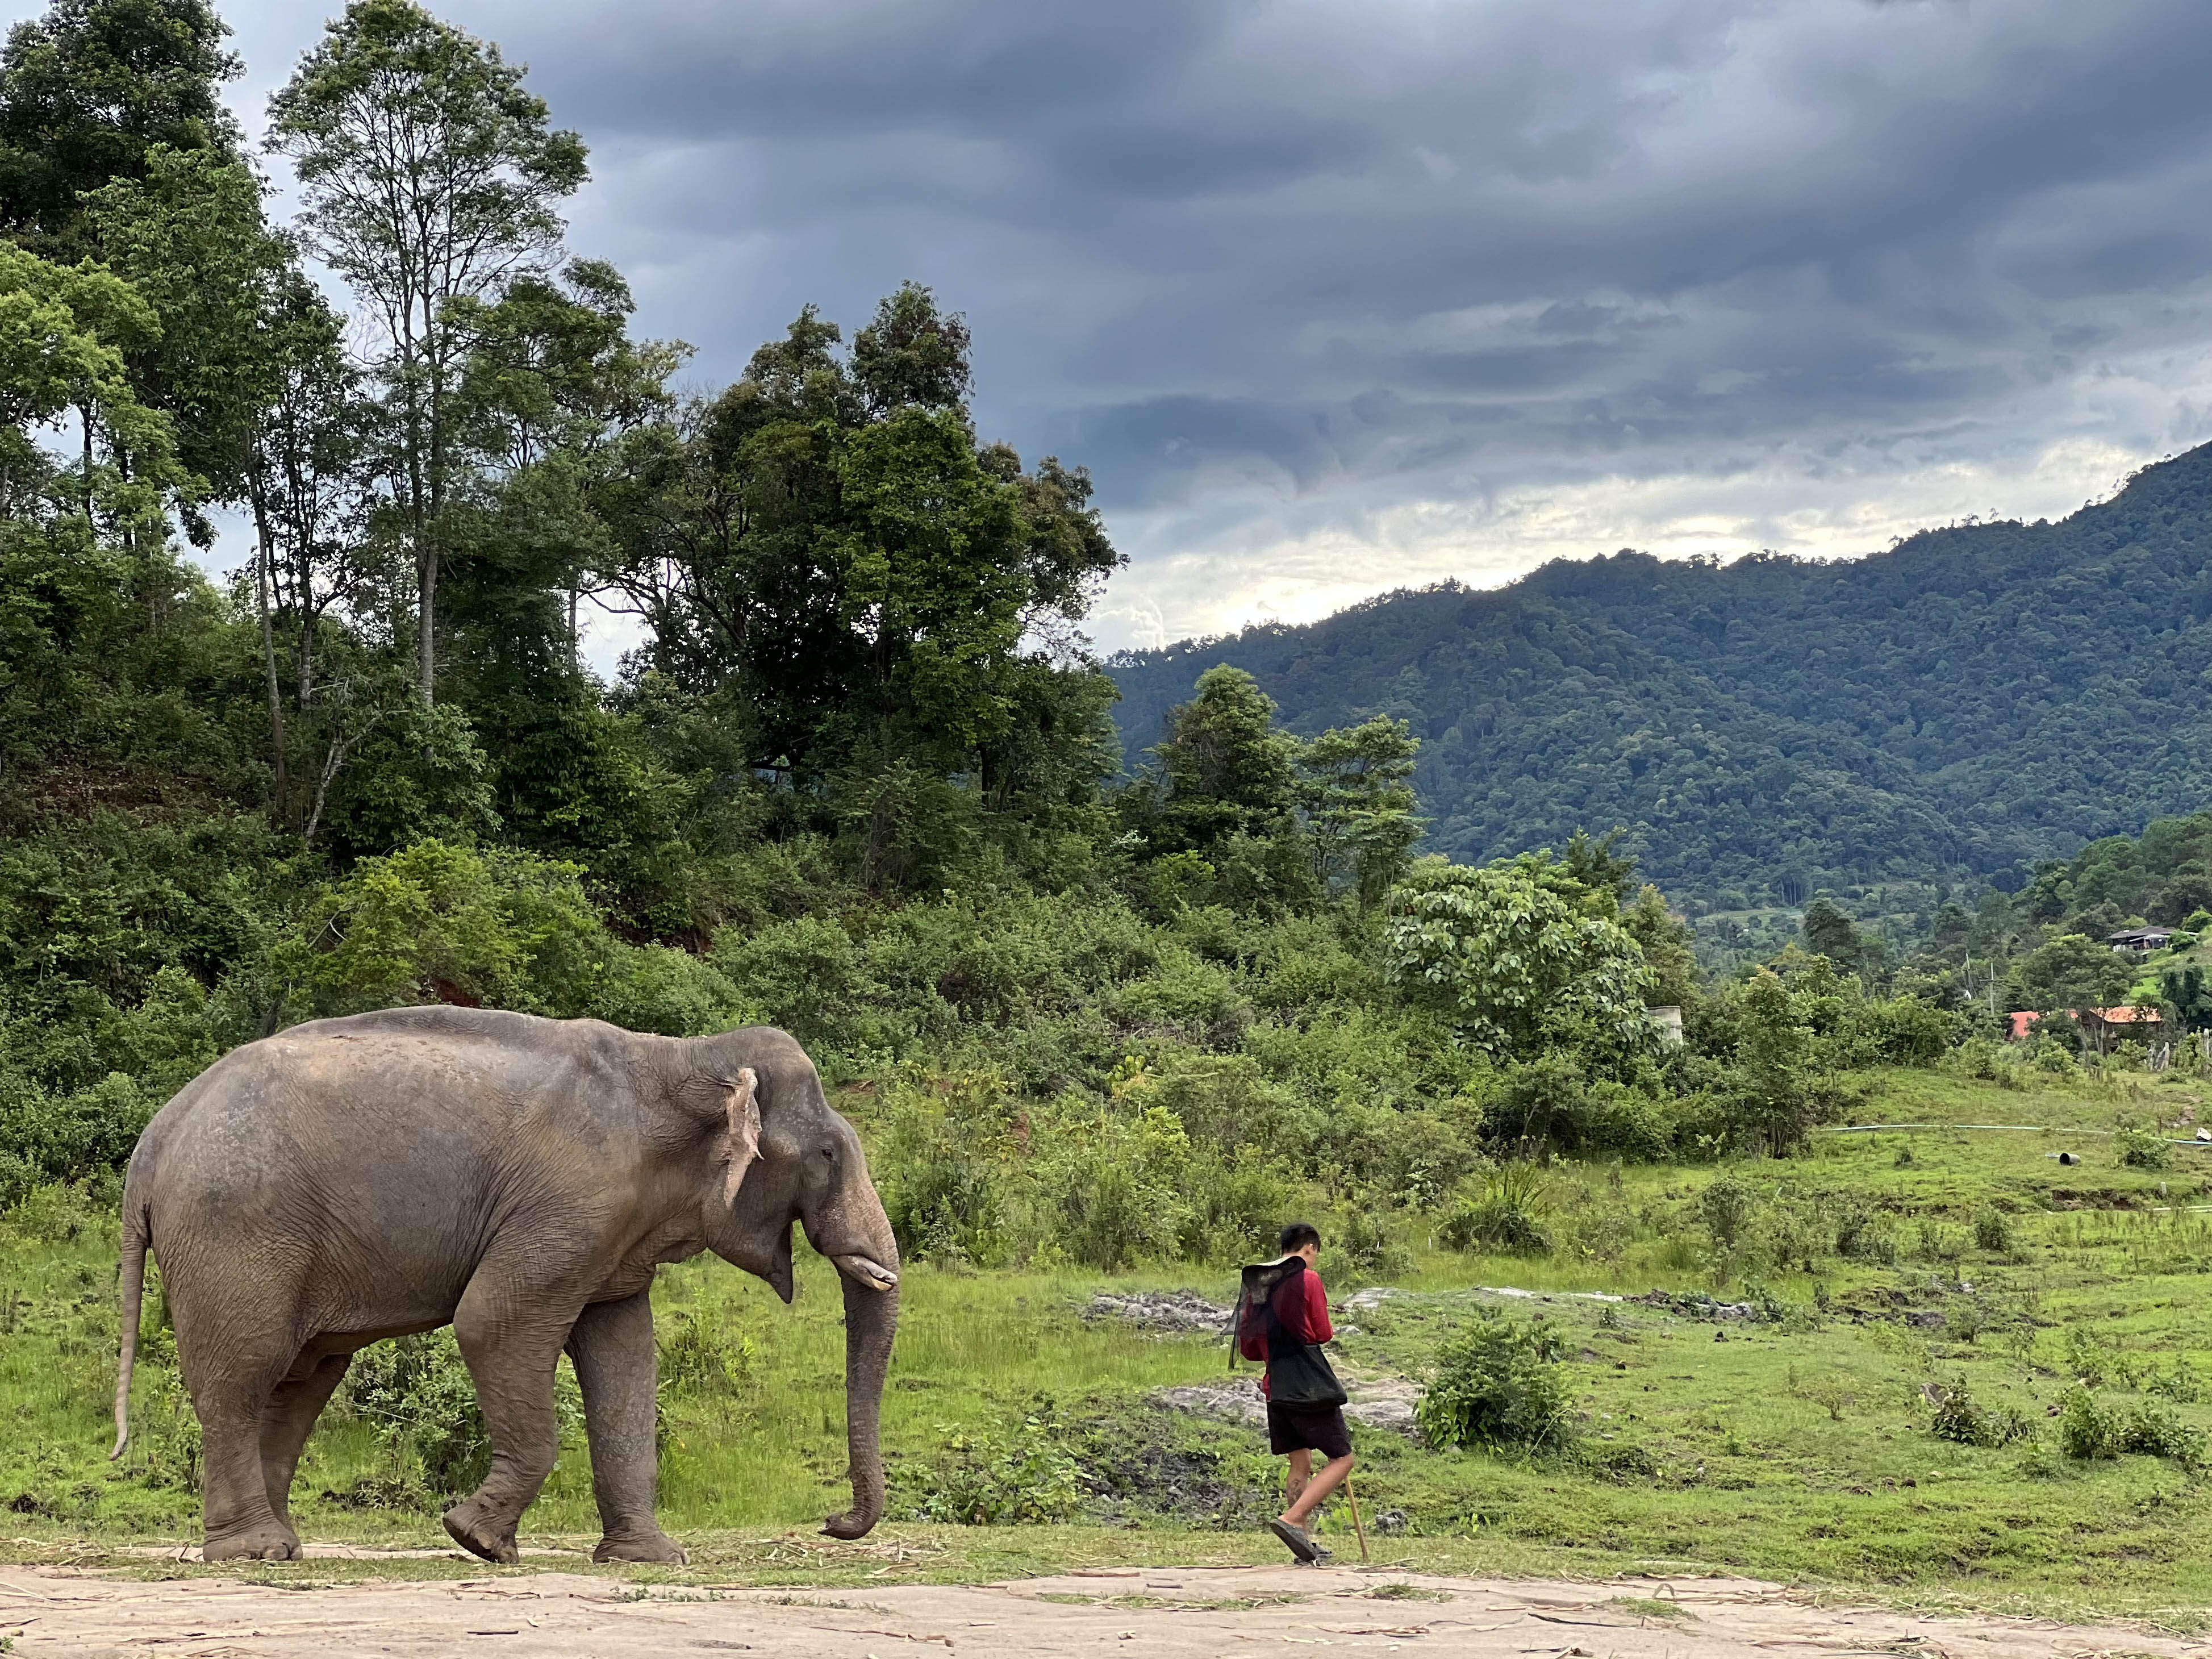 An elephant walks alongside his handler at this pastoral sanctuary nestled in the rugged hills outside Doi Inthanon National Park.